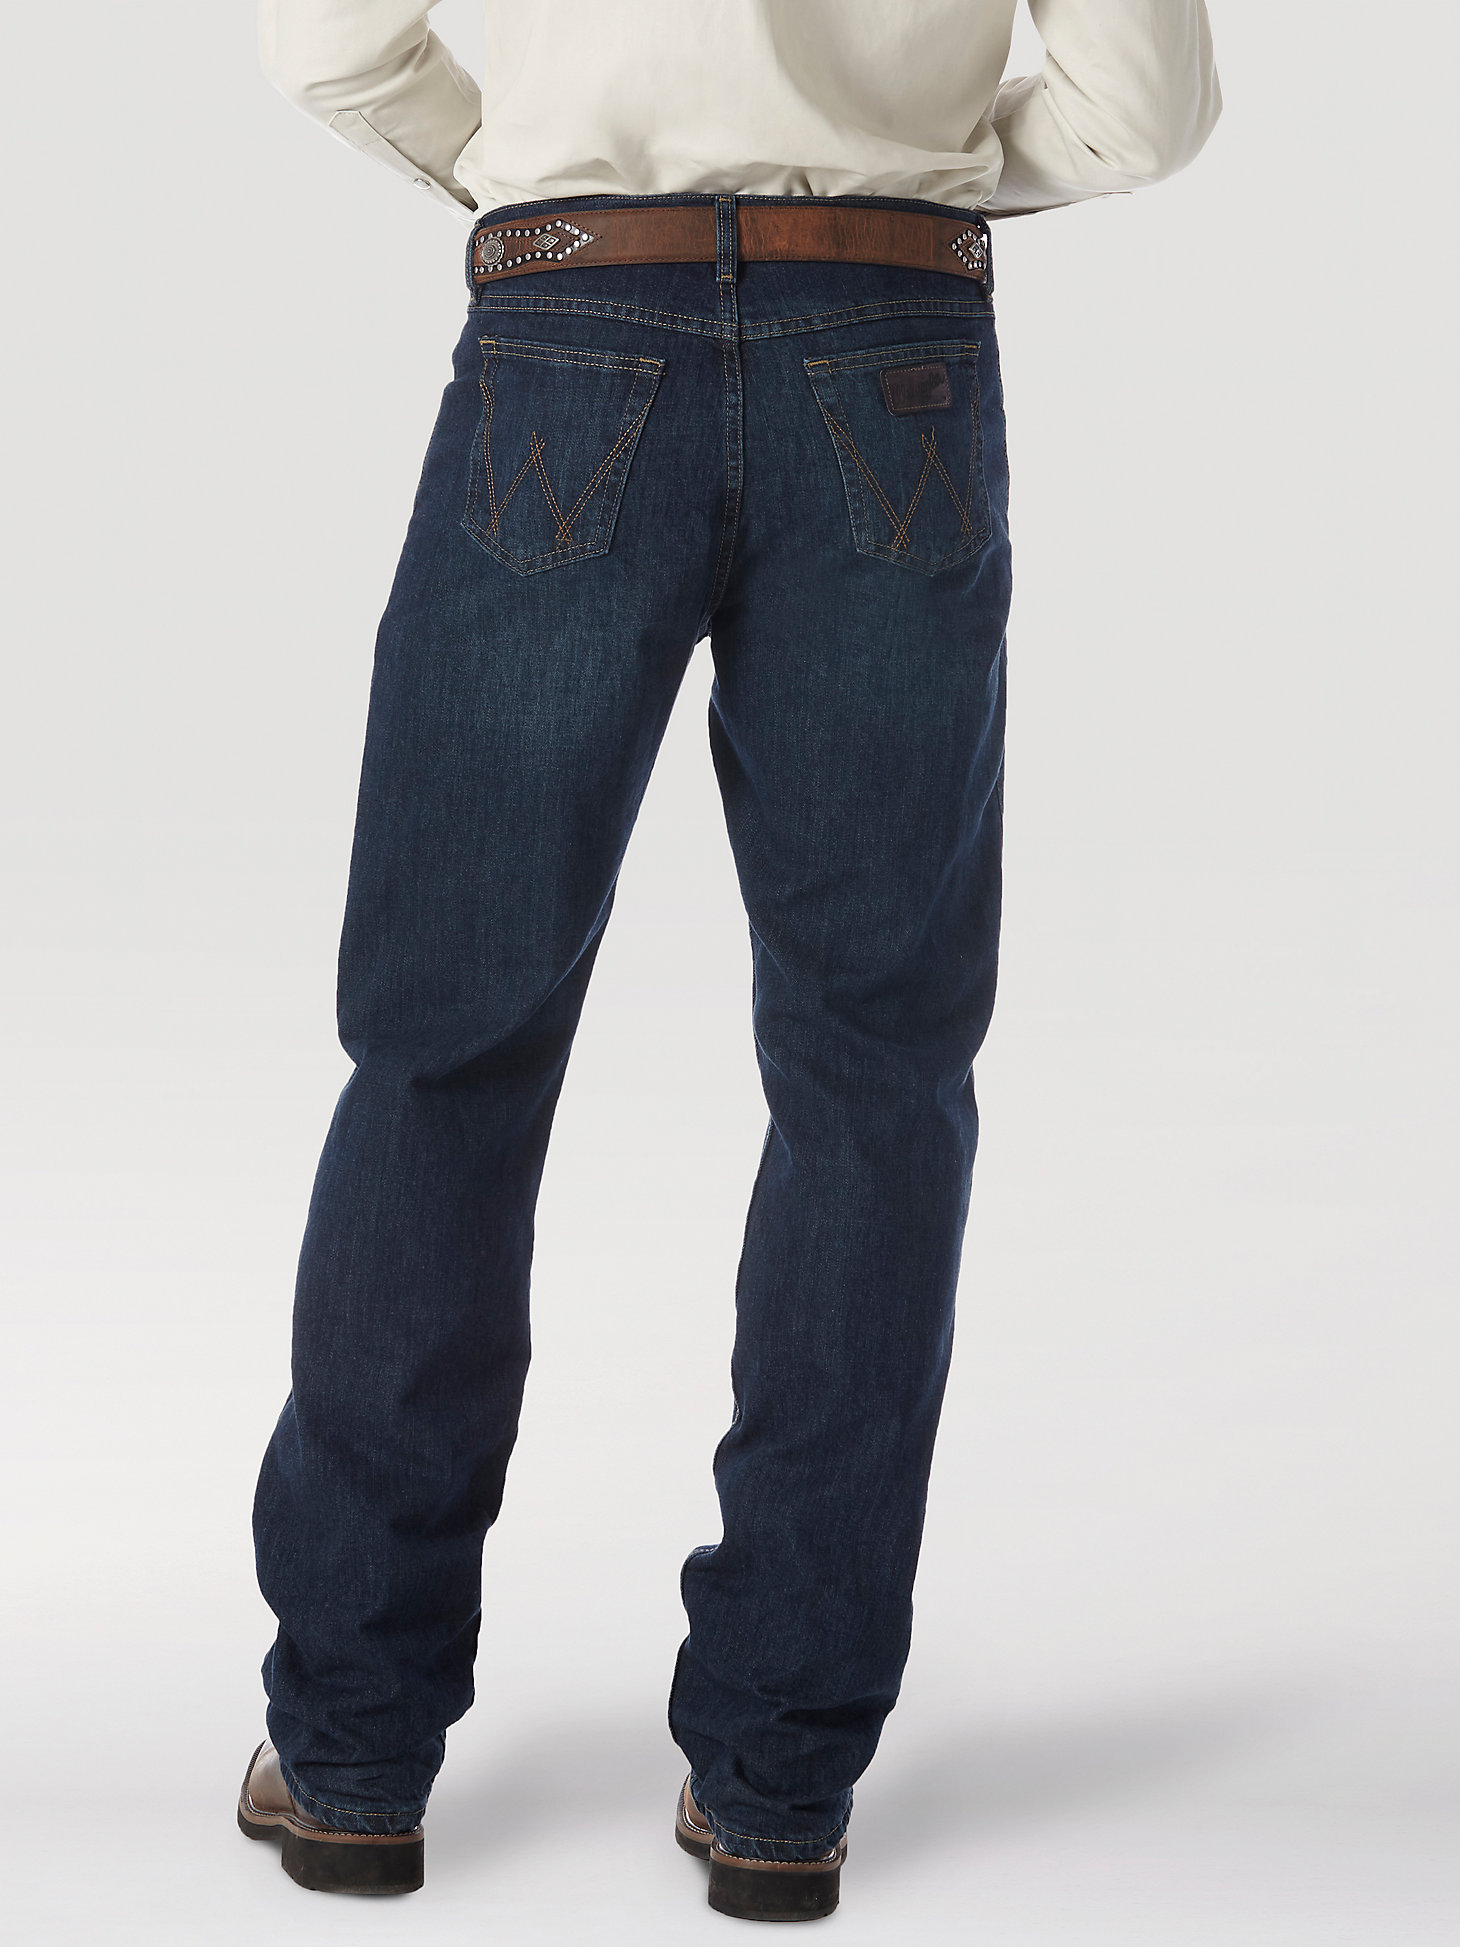 Wrangler® 20X® 01 Competition Jean in Deep Blue alternative view 2